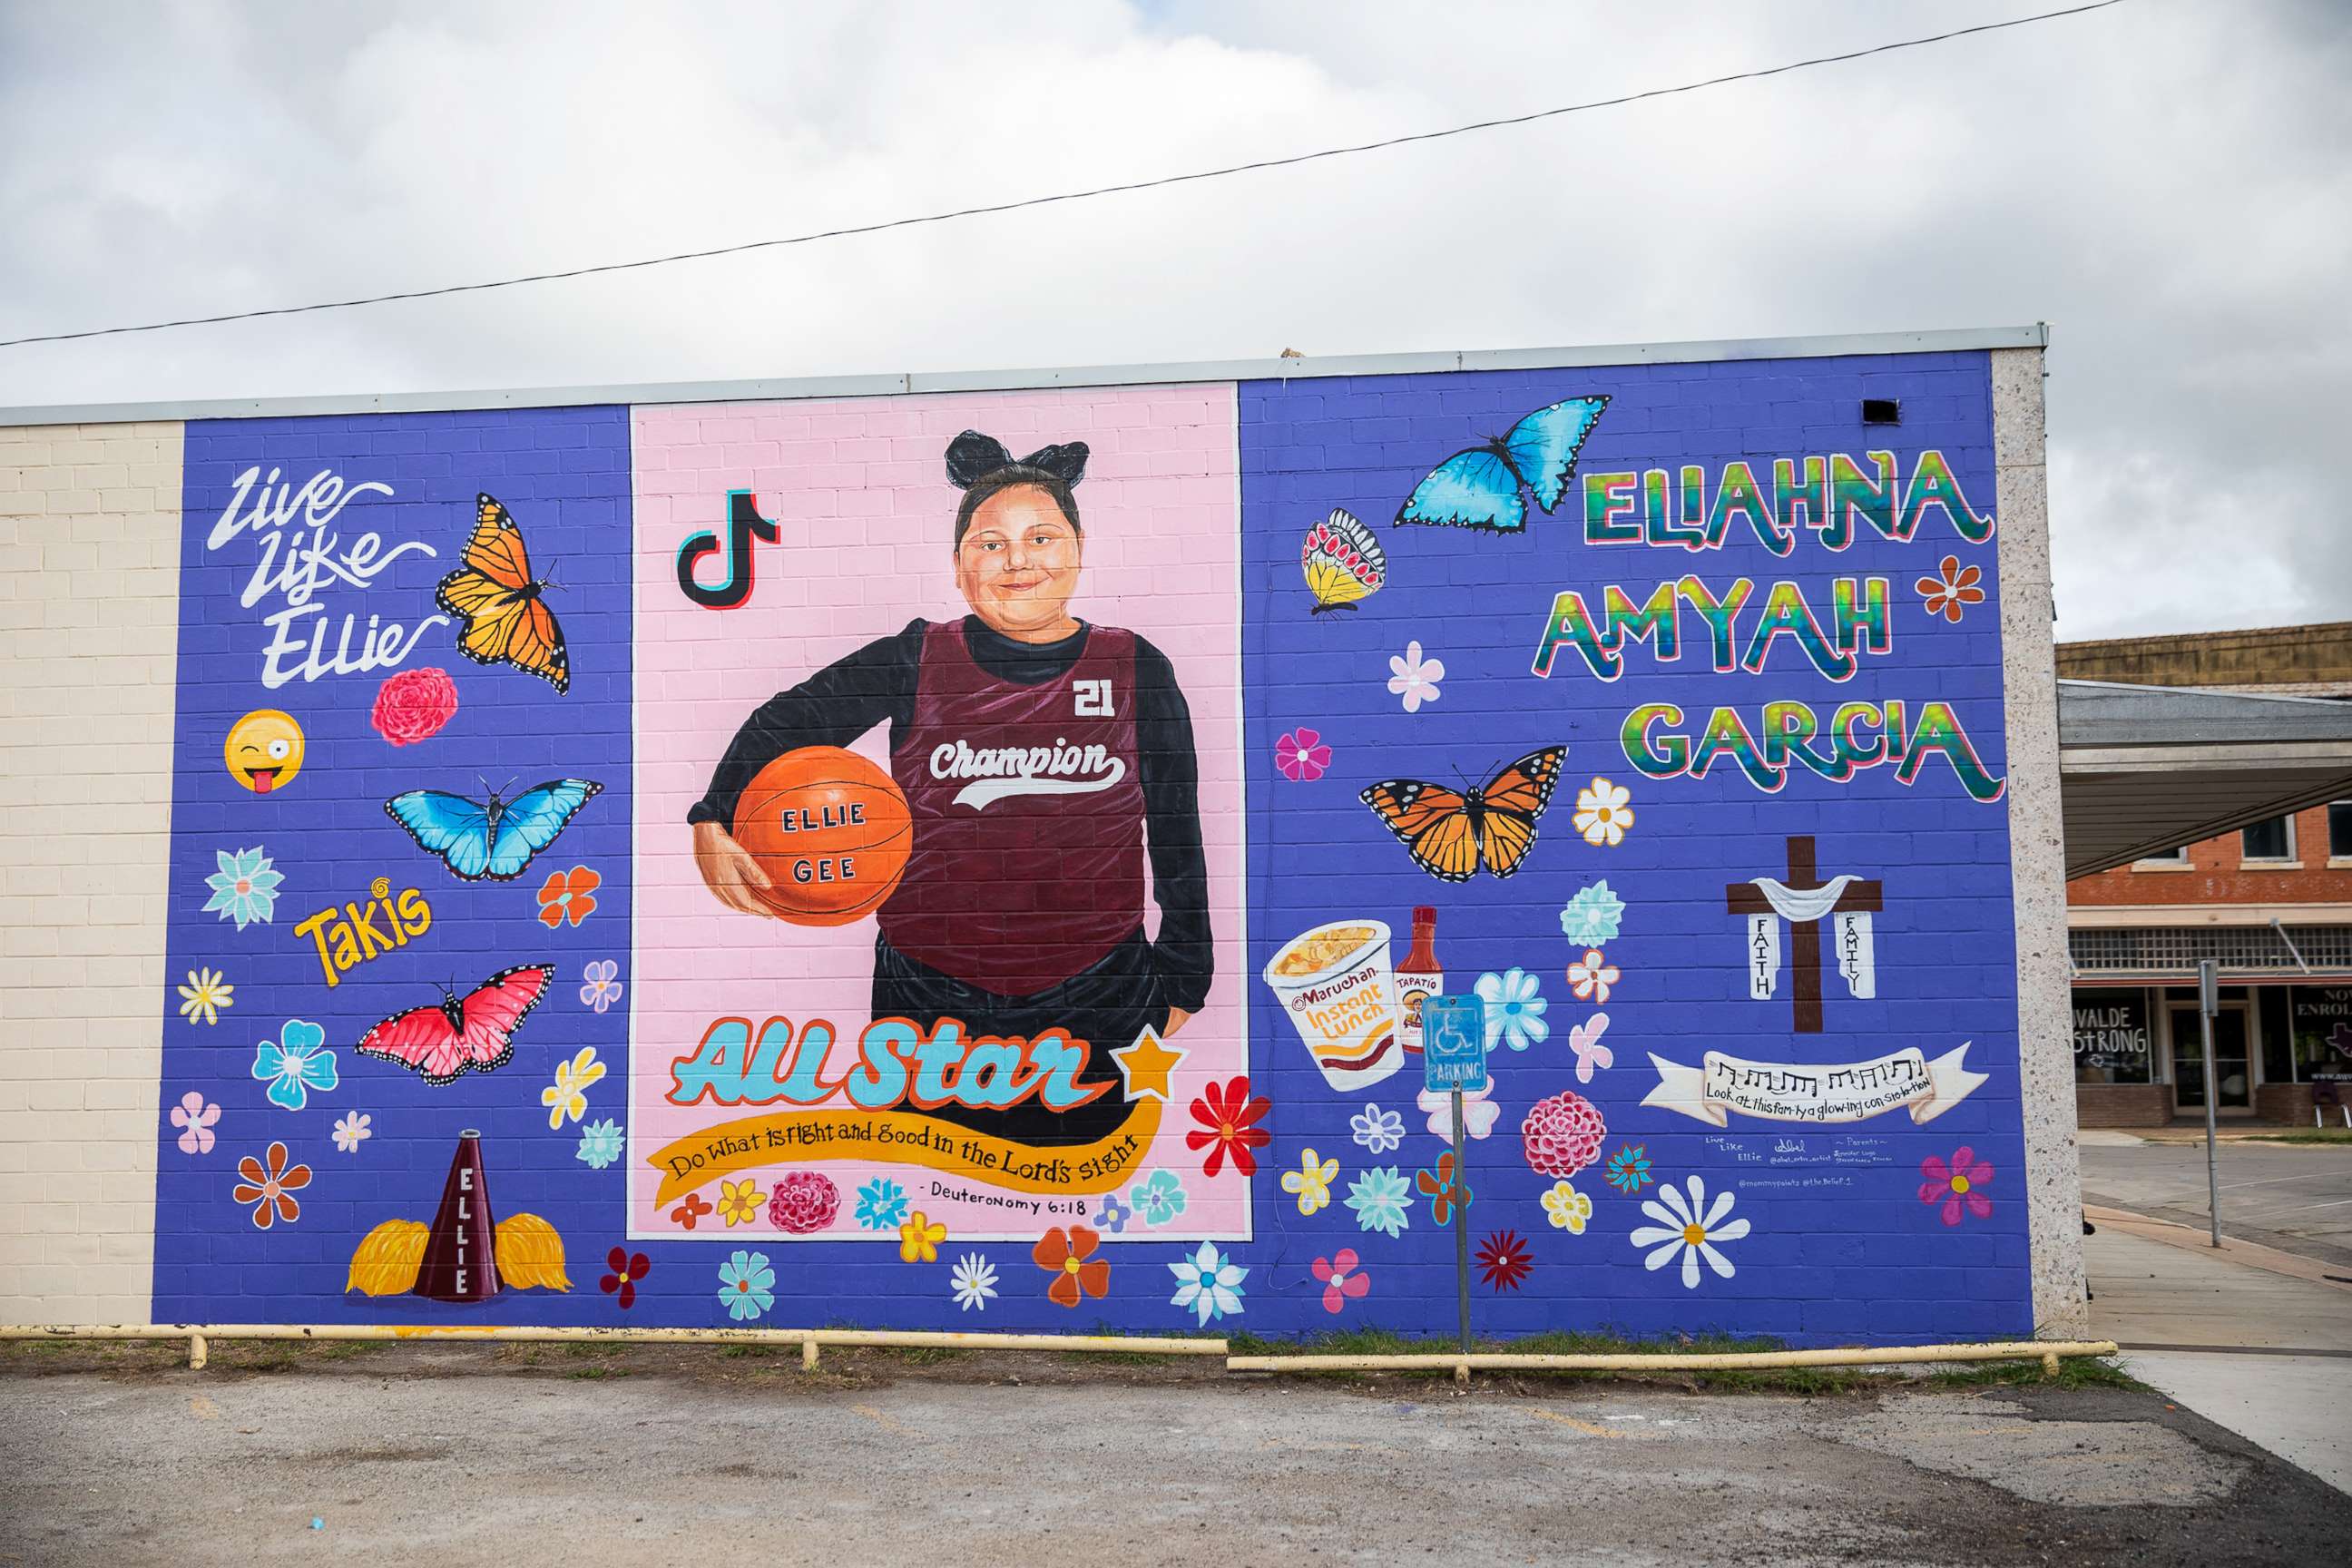 PHOTO: A mural in honor of Eliahna Amyah Garcia fills the wall of a building in downtown Uvalde, Texas, Aug. 21, 2022.